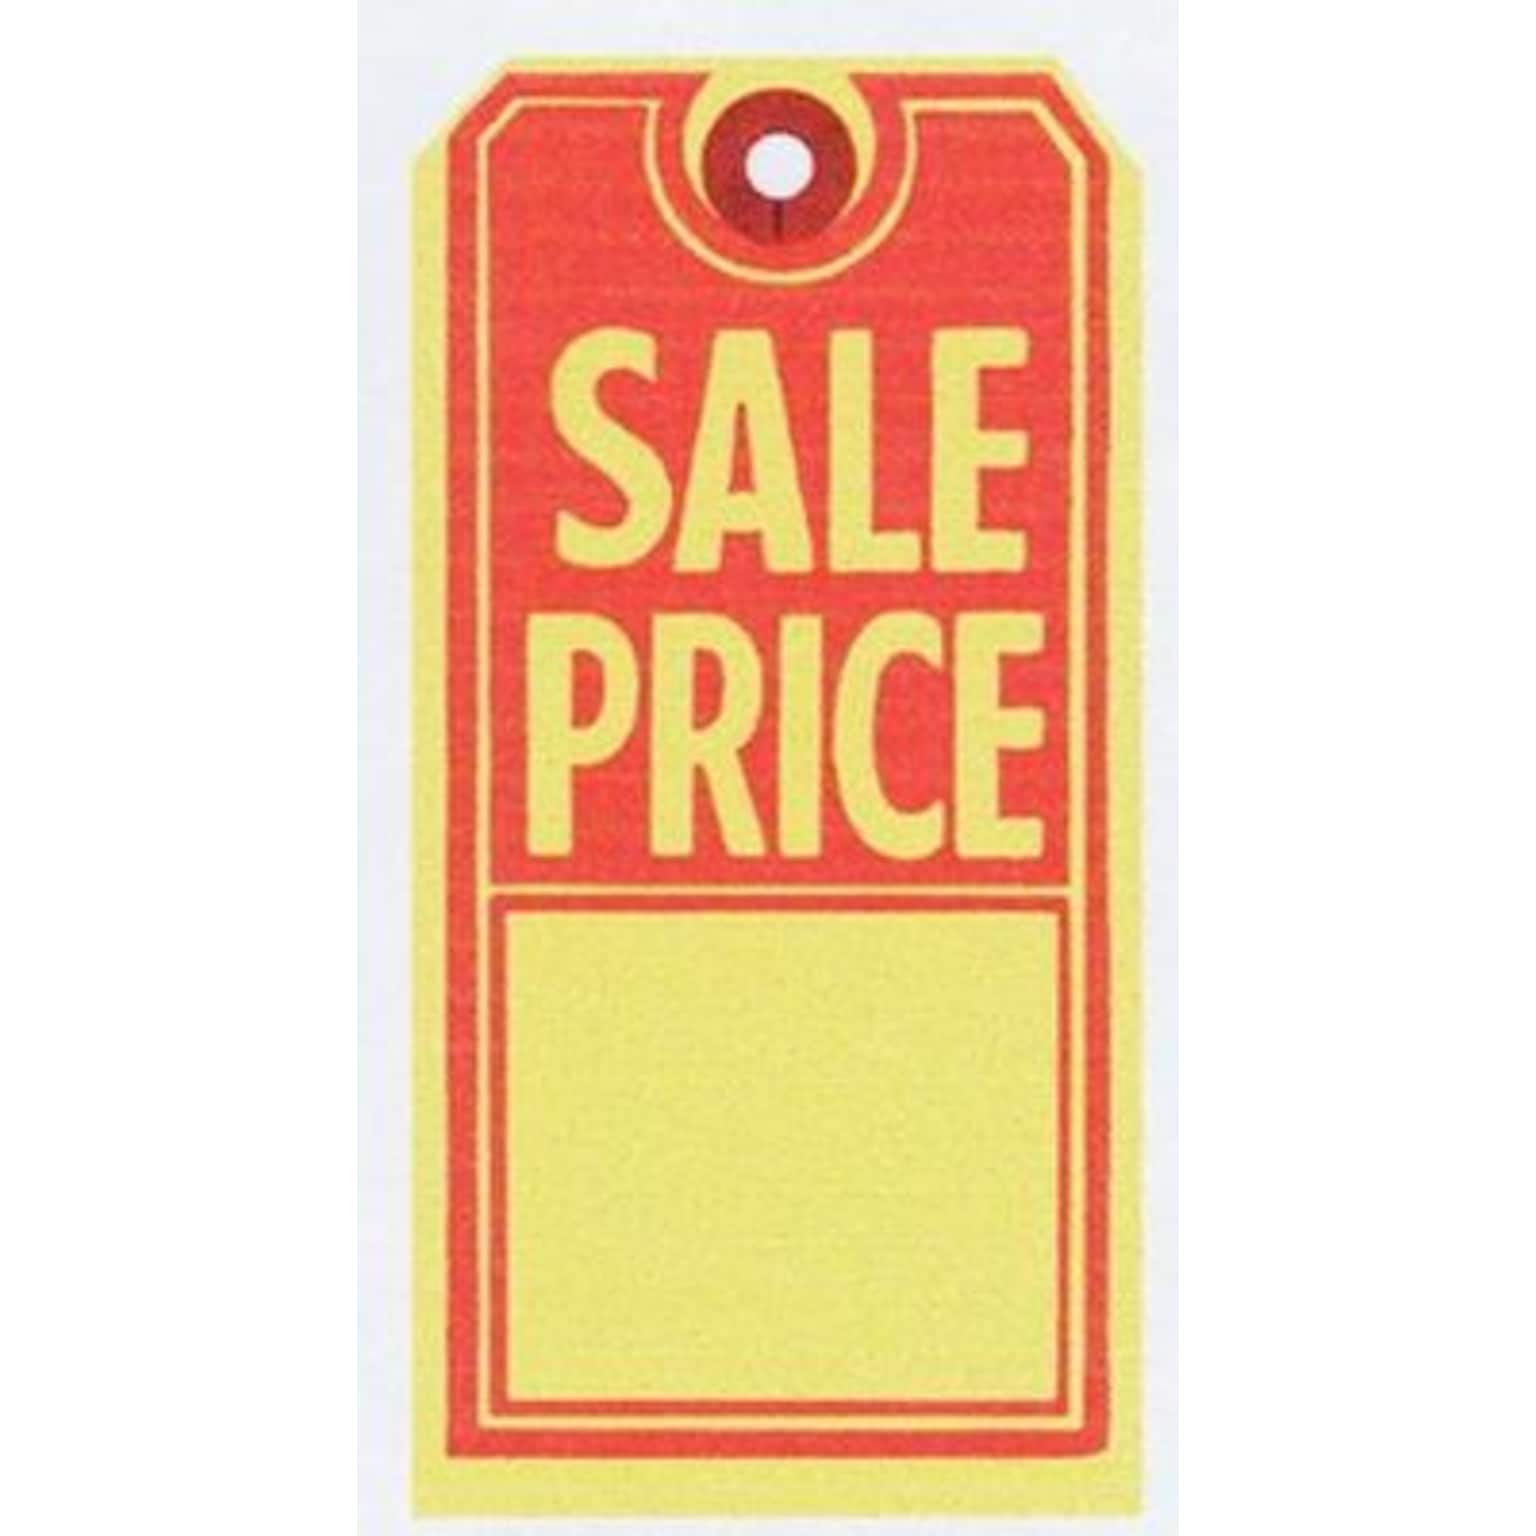 NAHANCO 2 5/8 x 5 1/4 Sale Tag, Red/Yellow, 1000/Pack